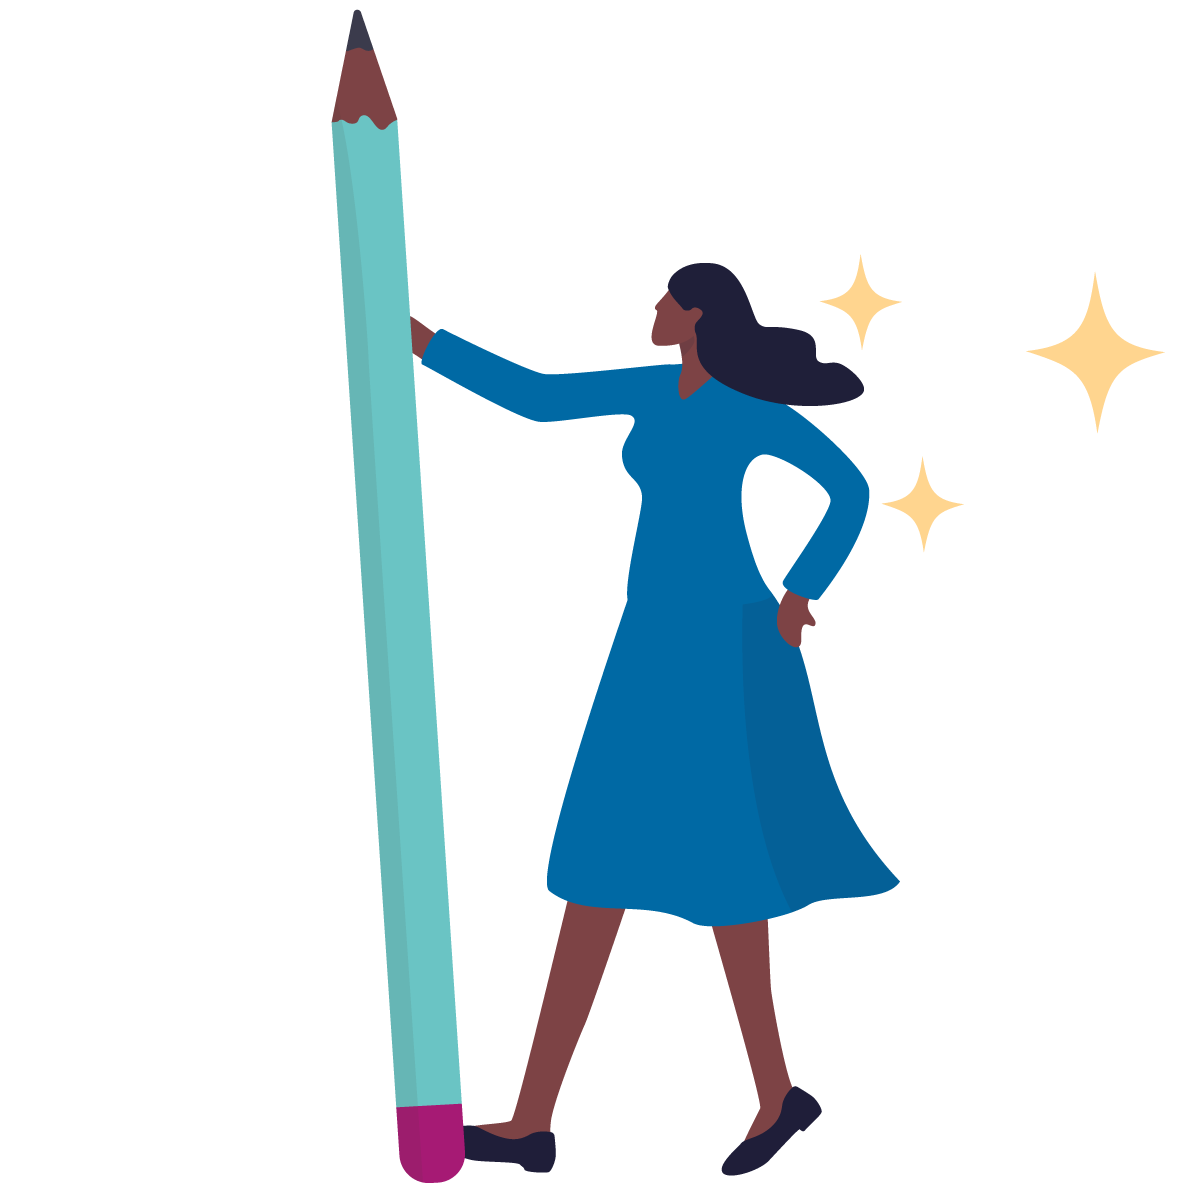 graphic of a woman wearing a blue dress holding a large pencil